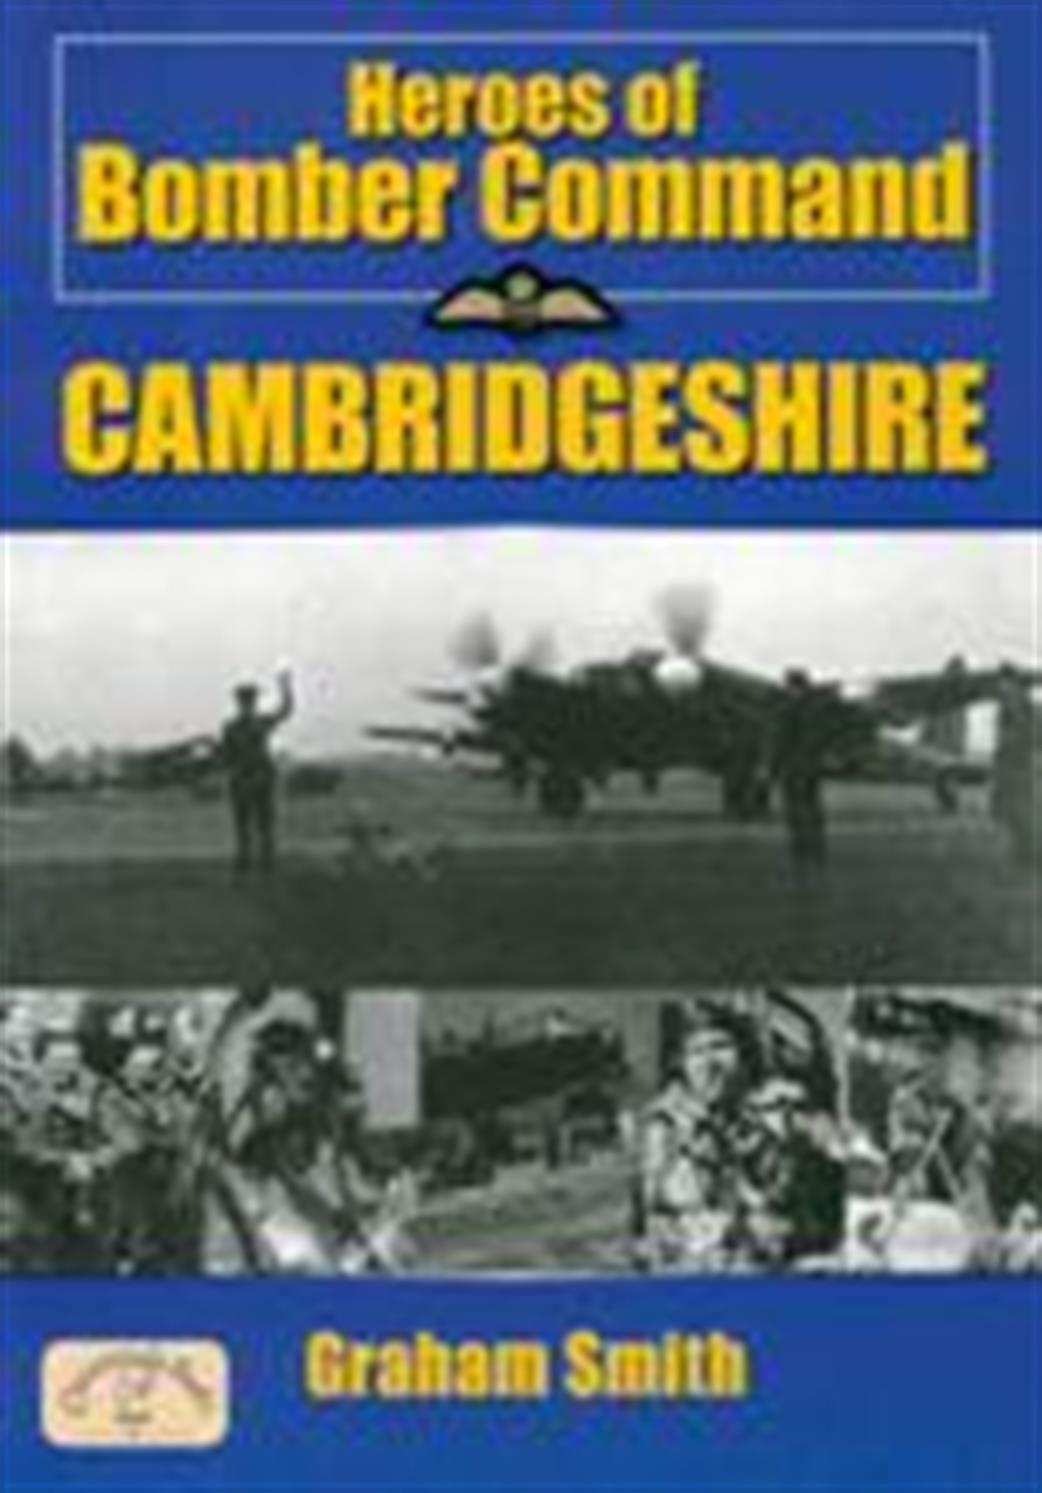 9781846740398 Heroes Of Bomber Command Cambridgeshire by Grahman Smith